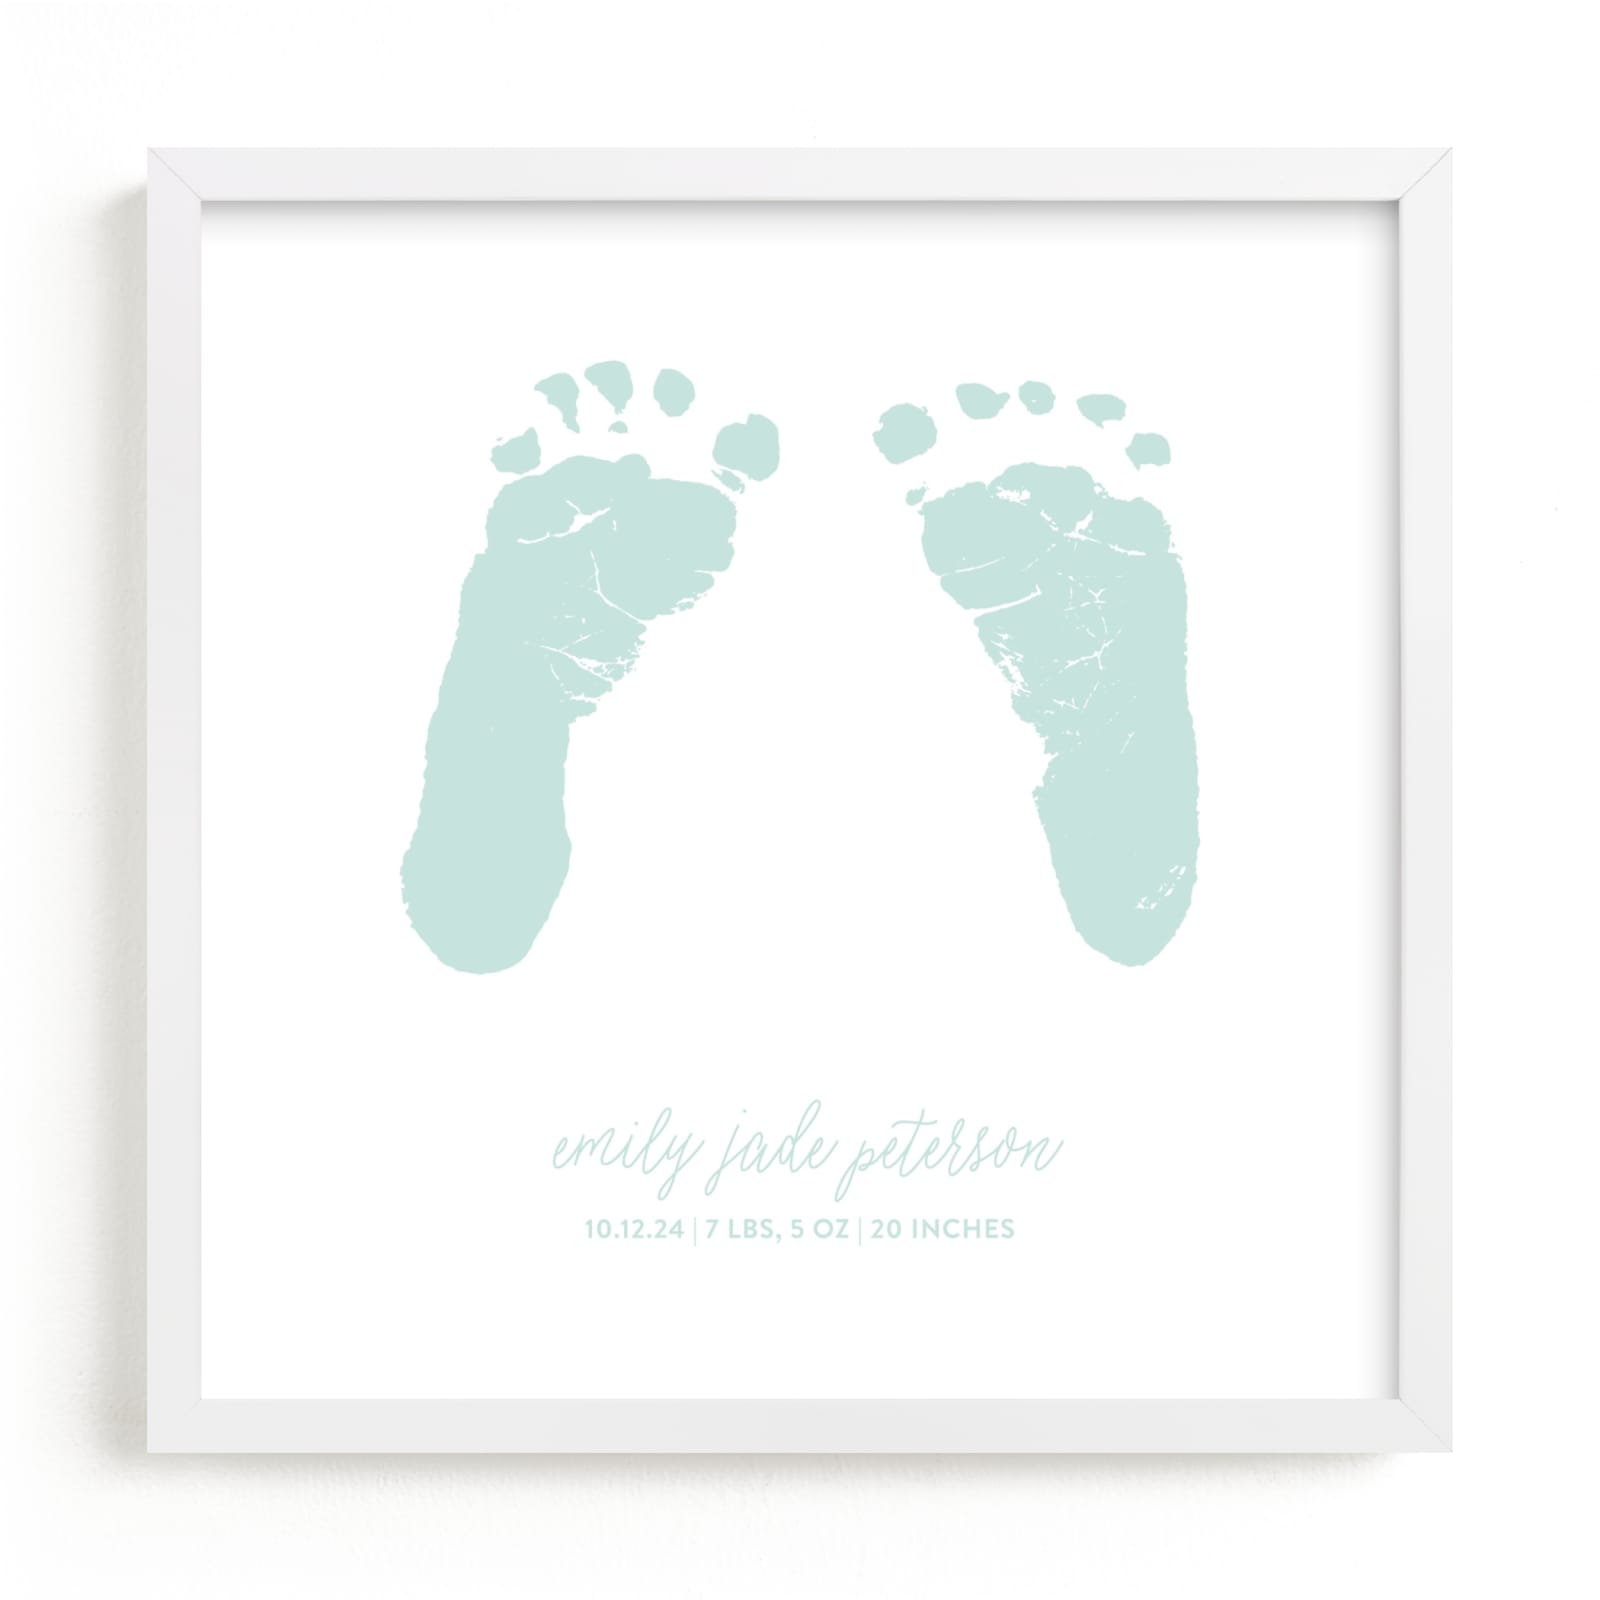 This is a green photos to art by Minted called Custom Footprints Letterpress Art.